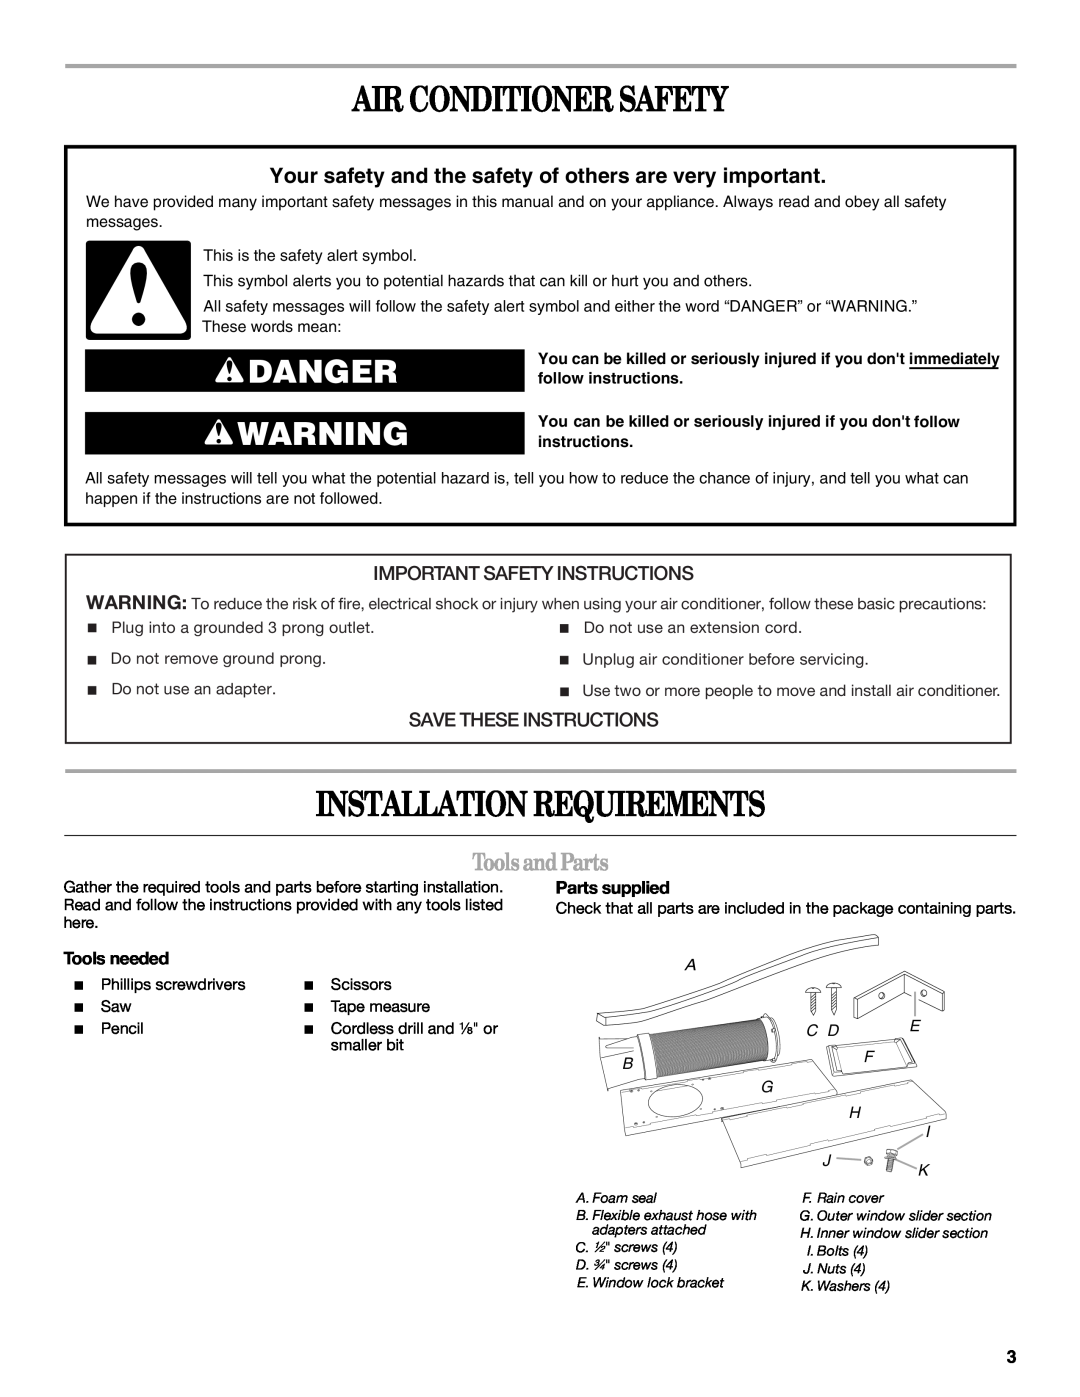 Whirlpool 1328891 Air Conditioner Safety, Installation Requirements, Danger, ToolsandParts, Important Safety Instructions 